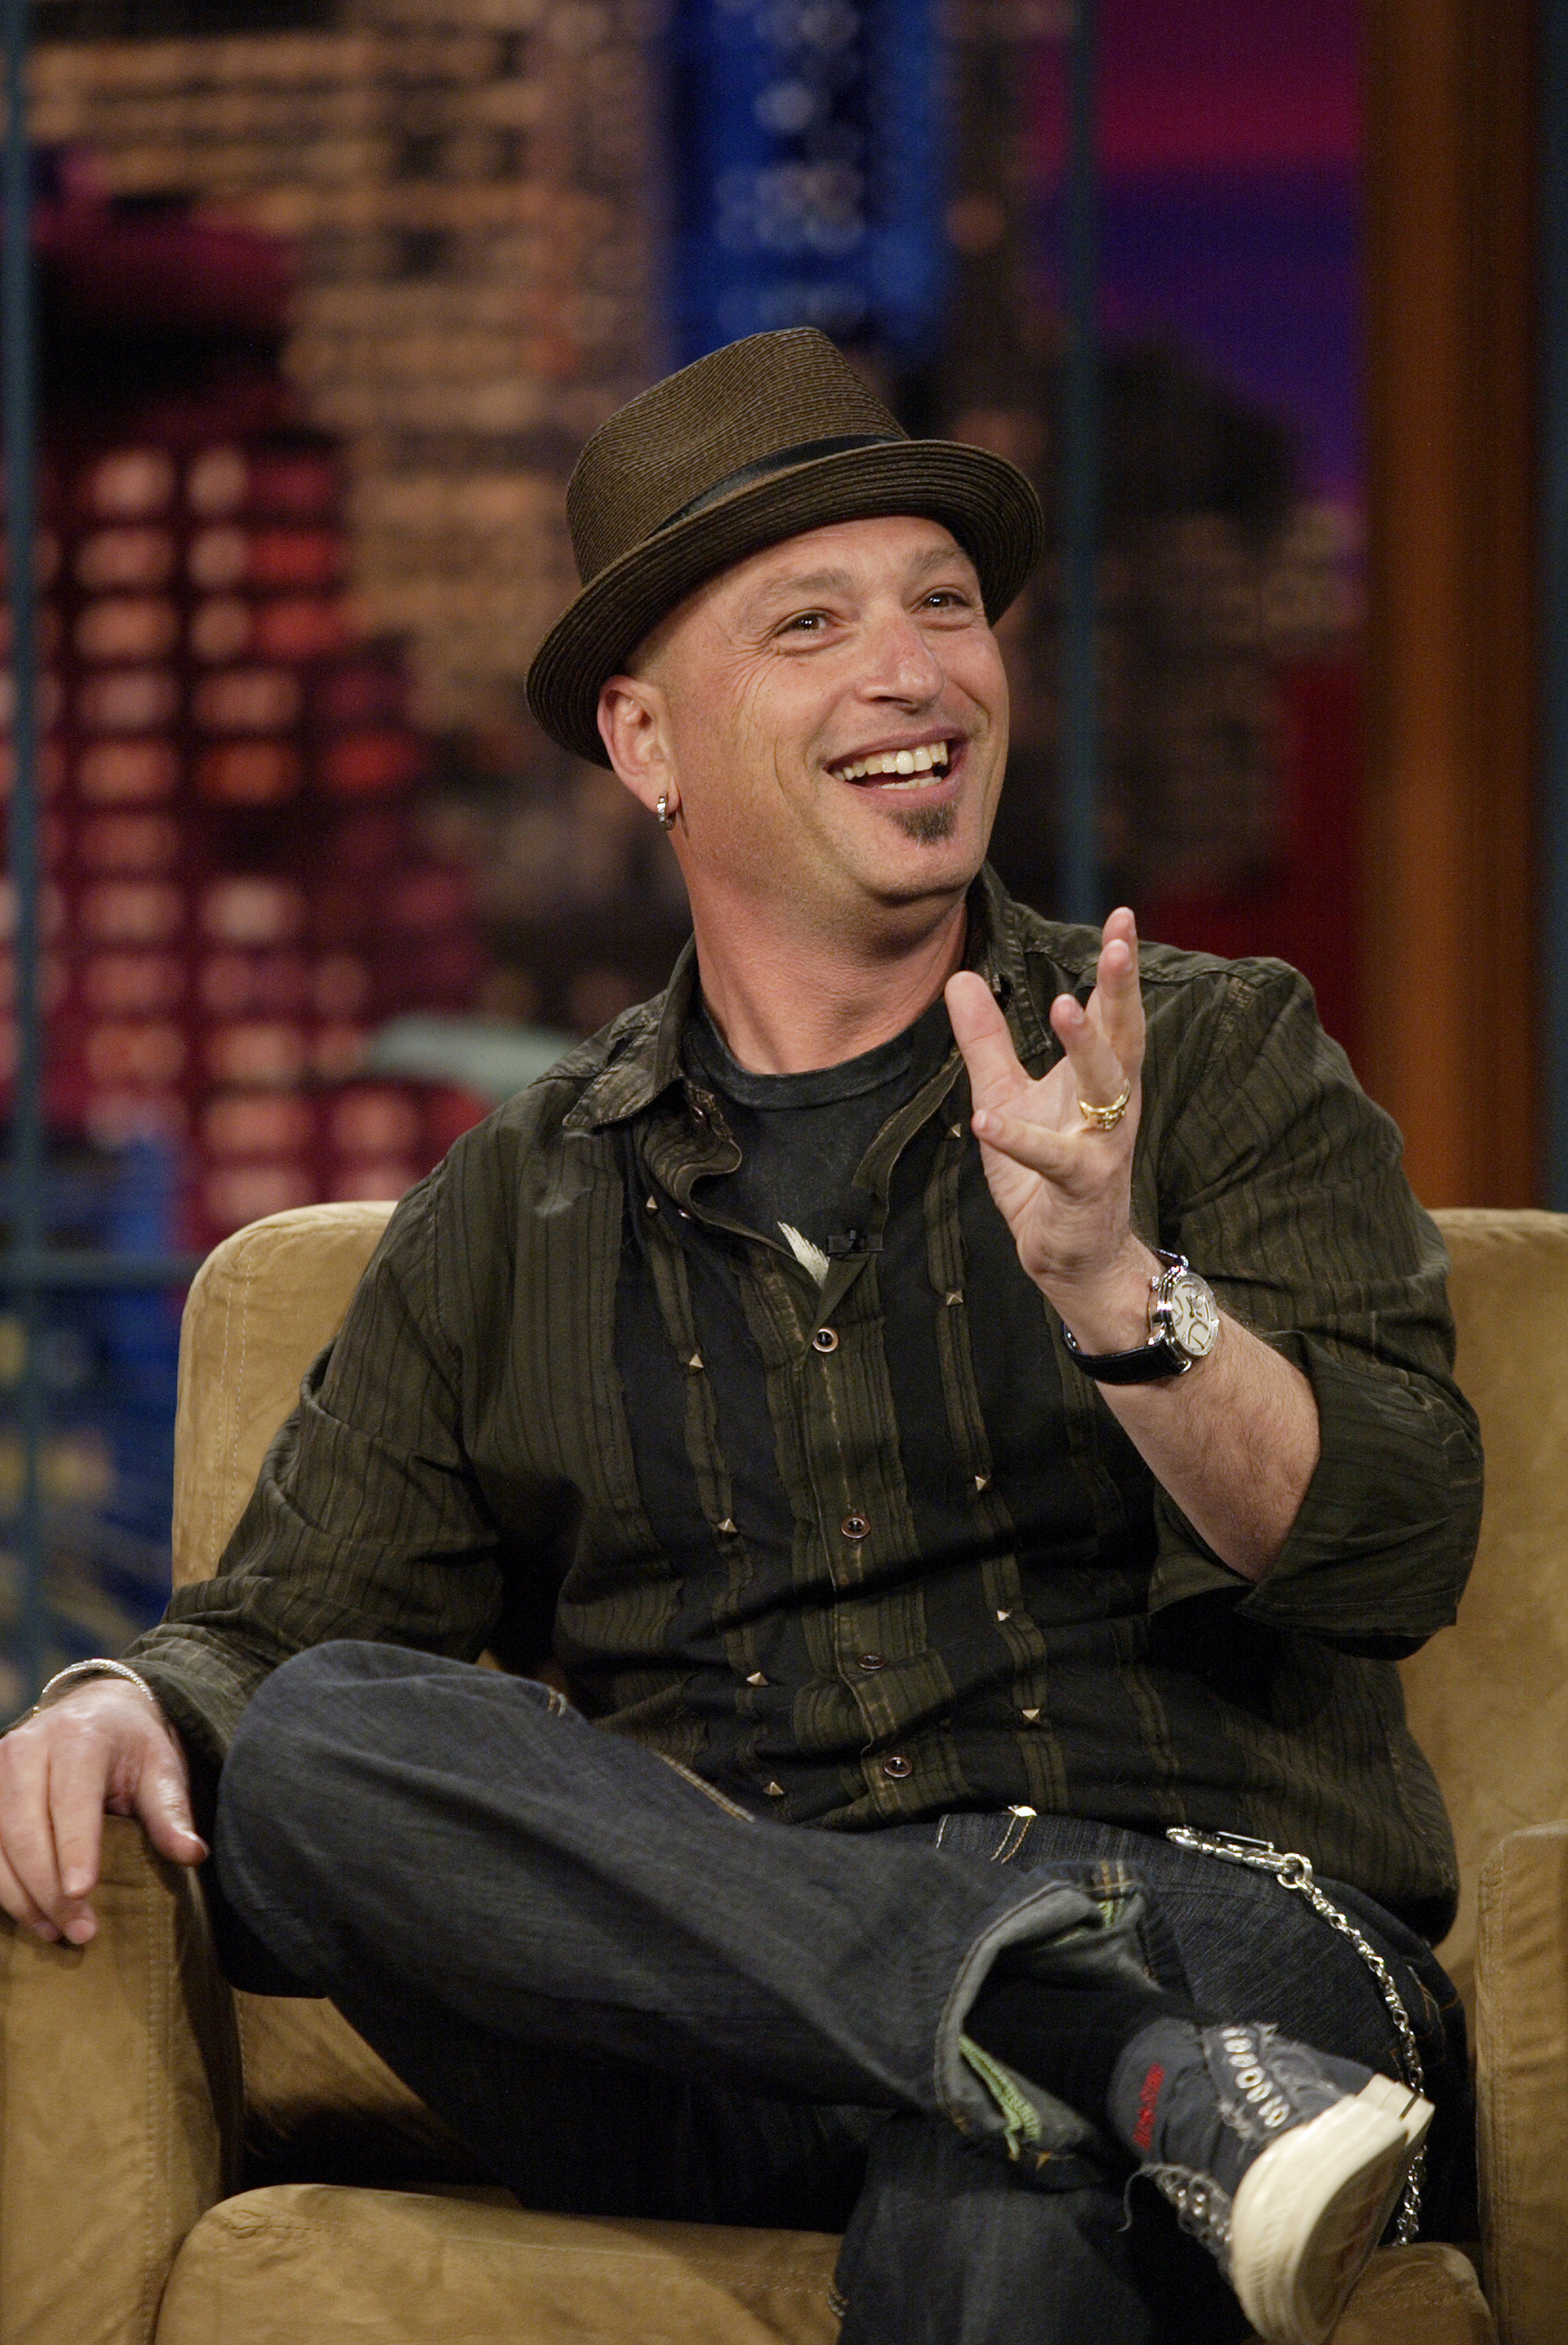 Howie Mandel, wearing a fedora and casual clothing, sits on a couch smiling.